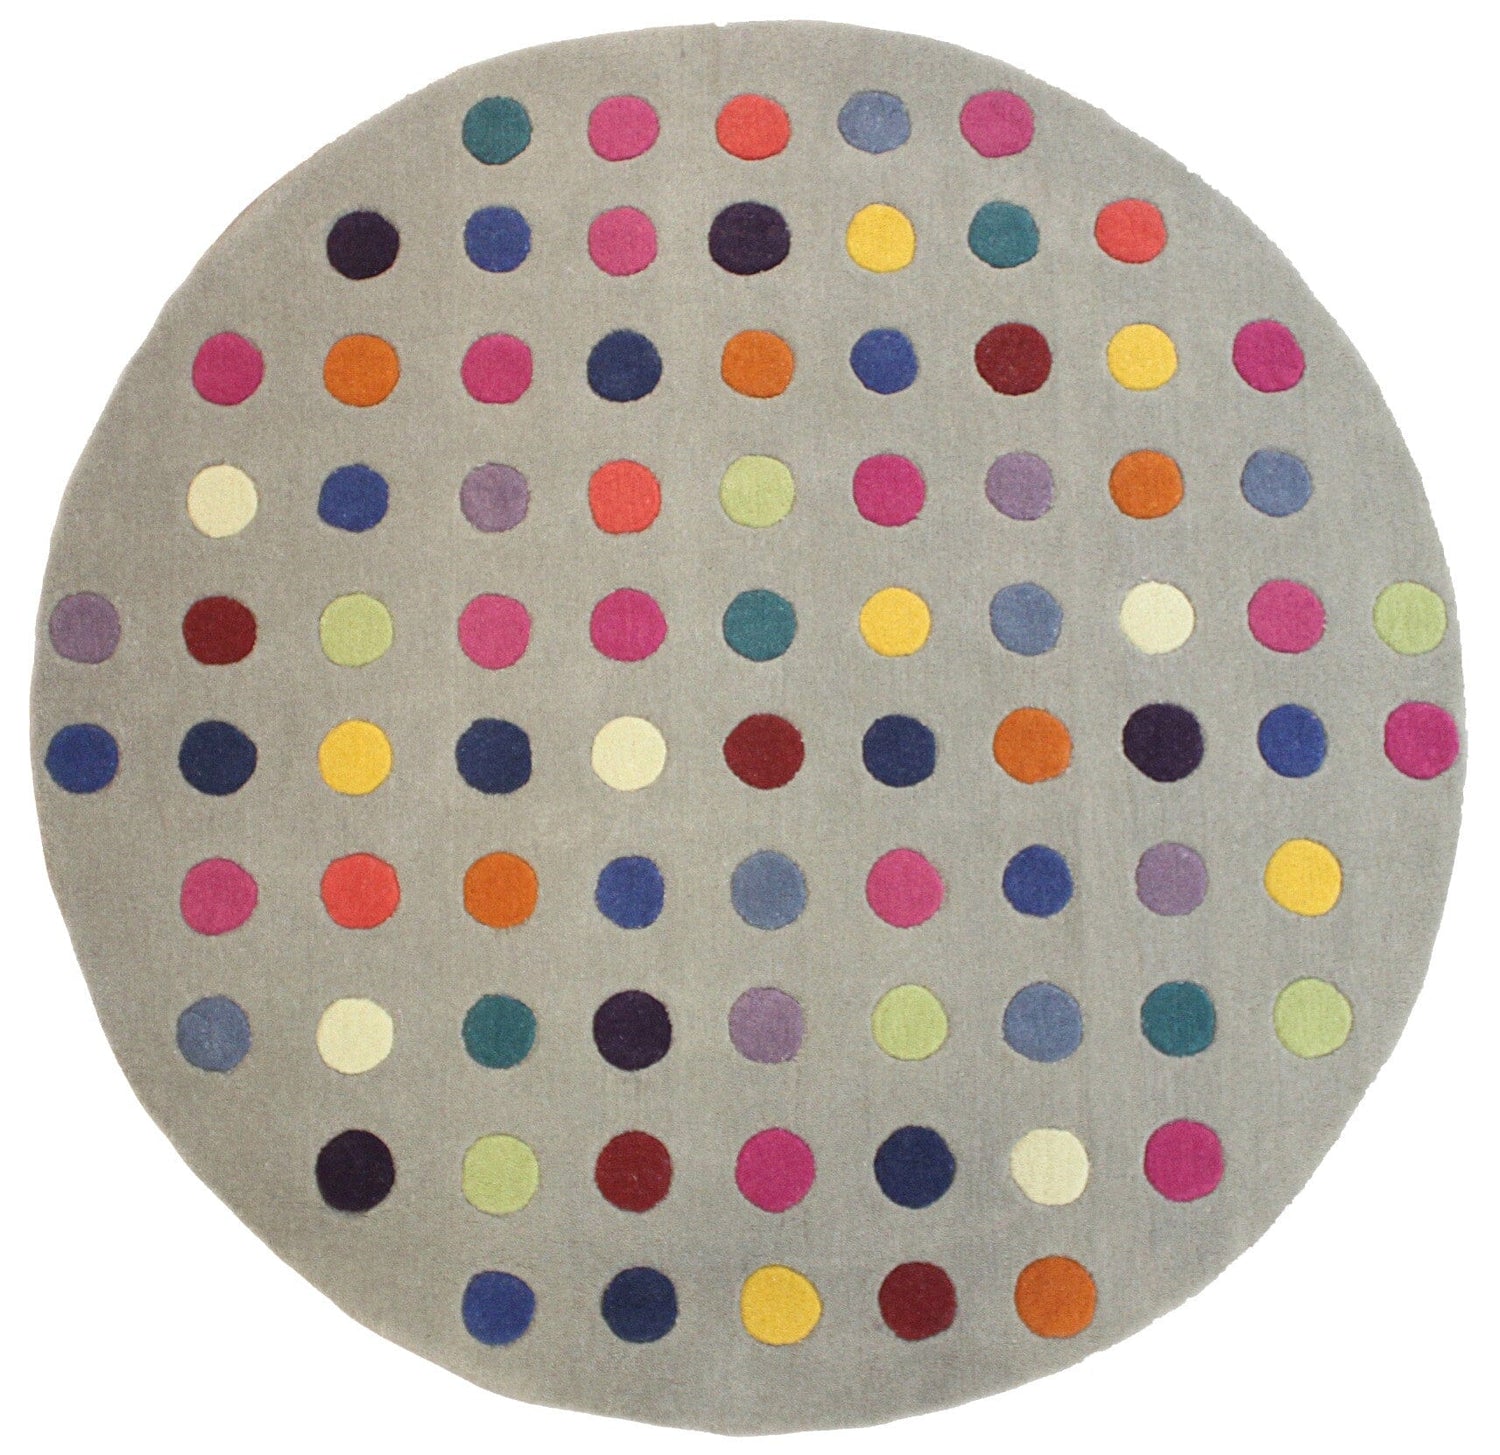  Asiatic Carpets-Asiatic Carpets Funk Hand Tufted Runner Spotty - 70 x 200cm-Multicoloured 221 